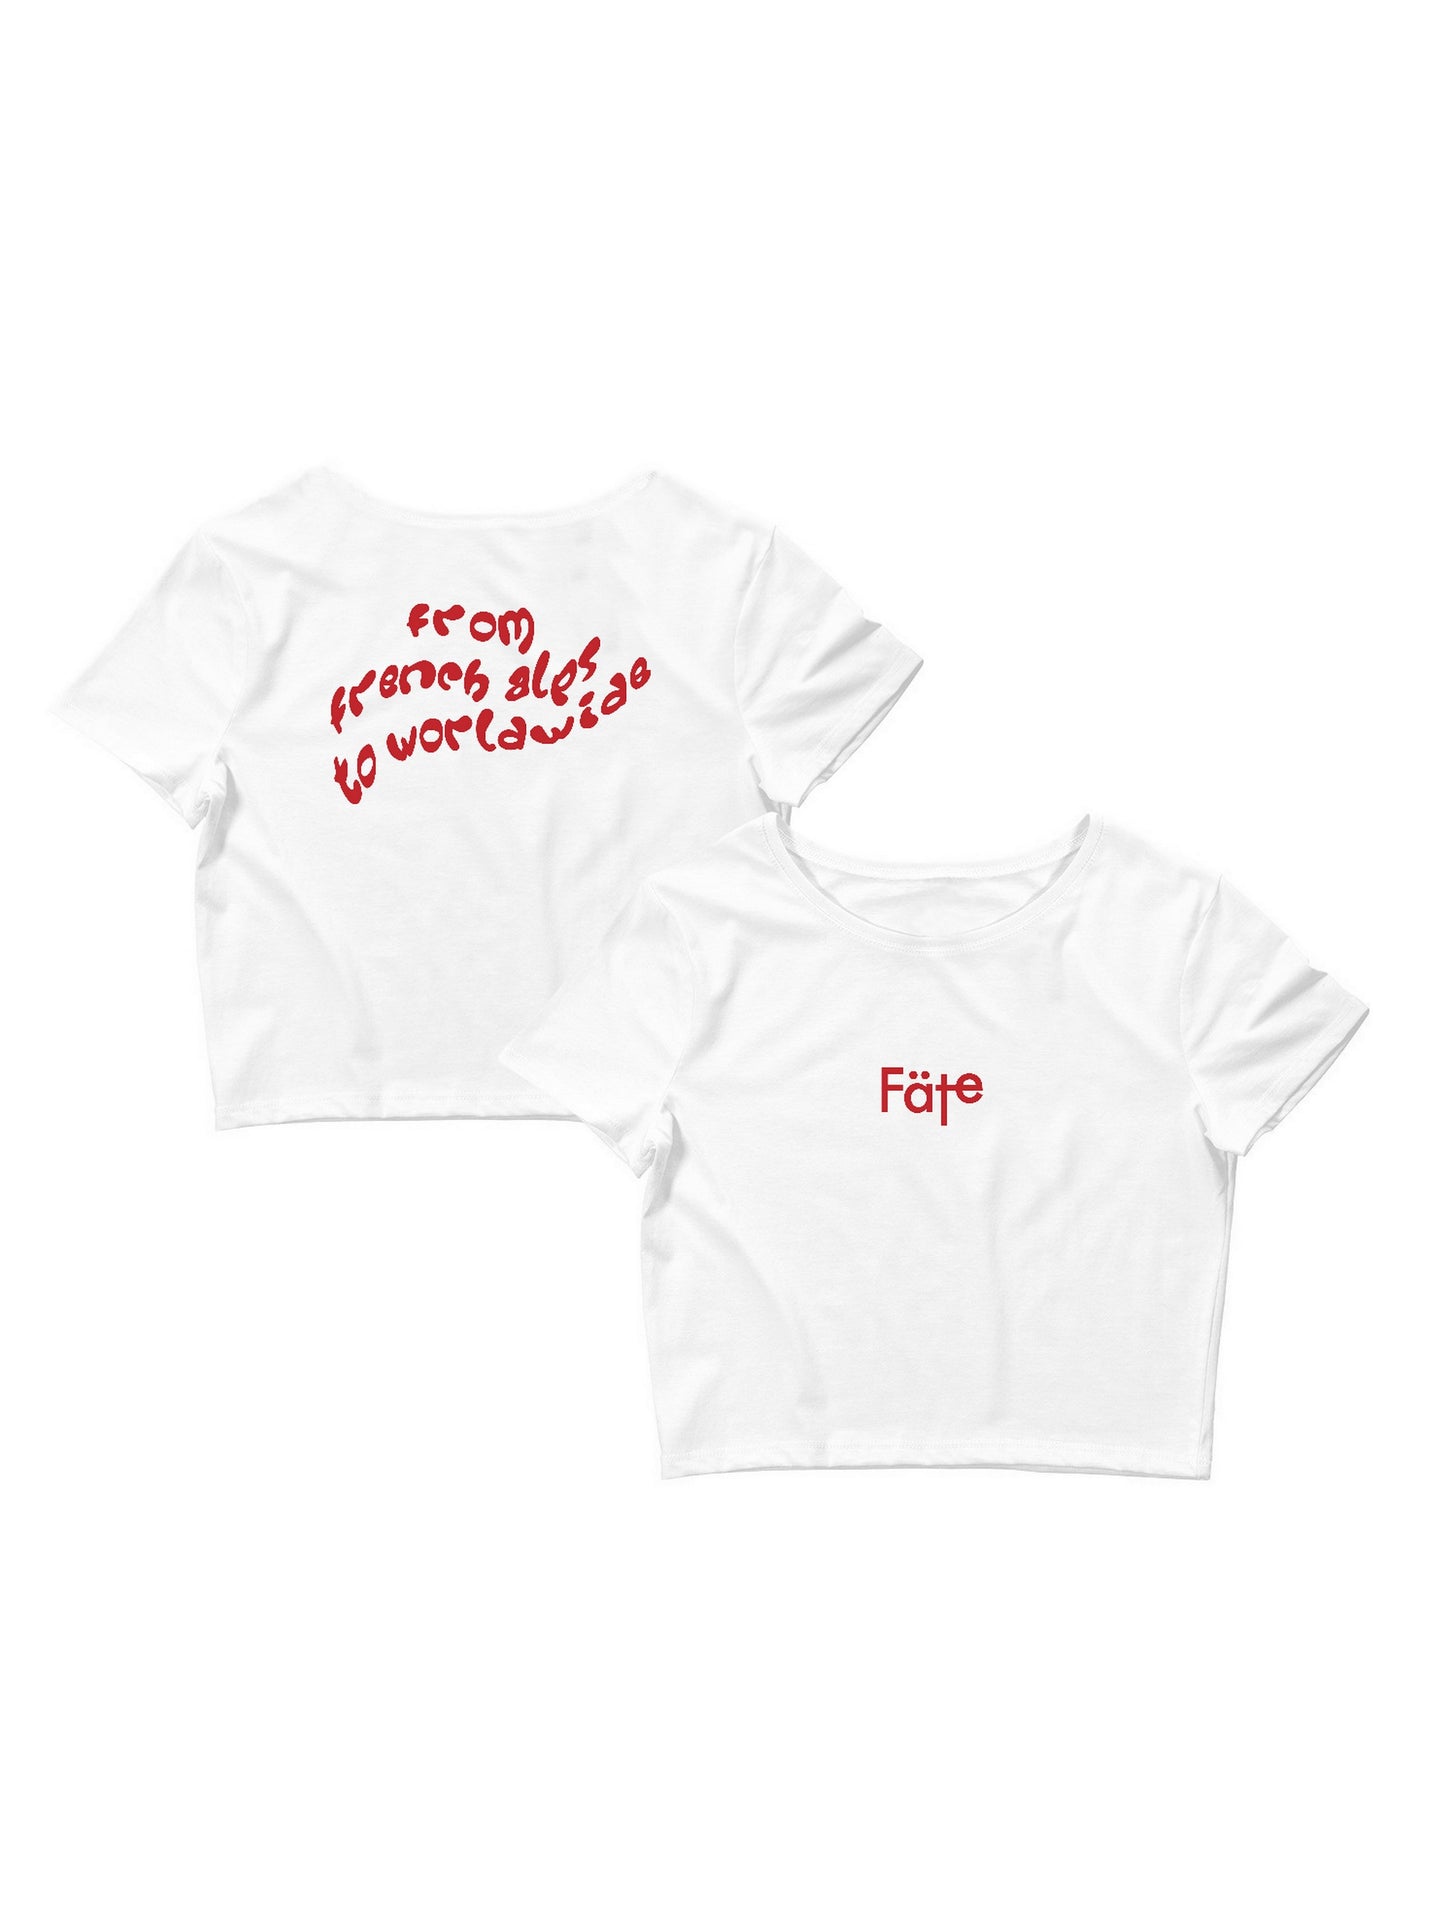 Crop top "from French Alps to worldwide" blanc